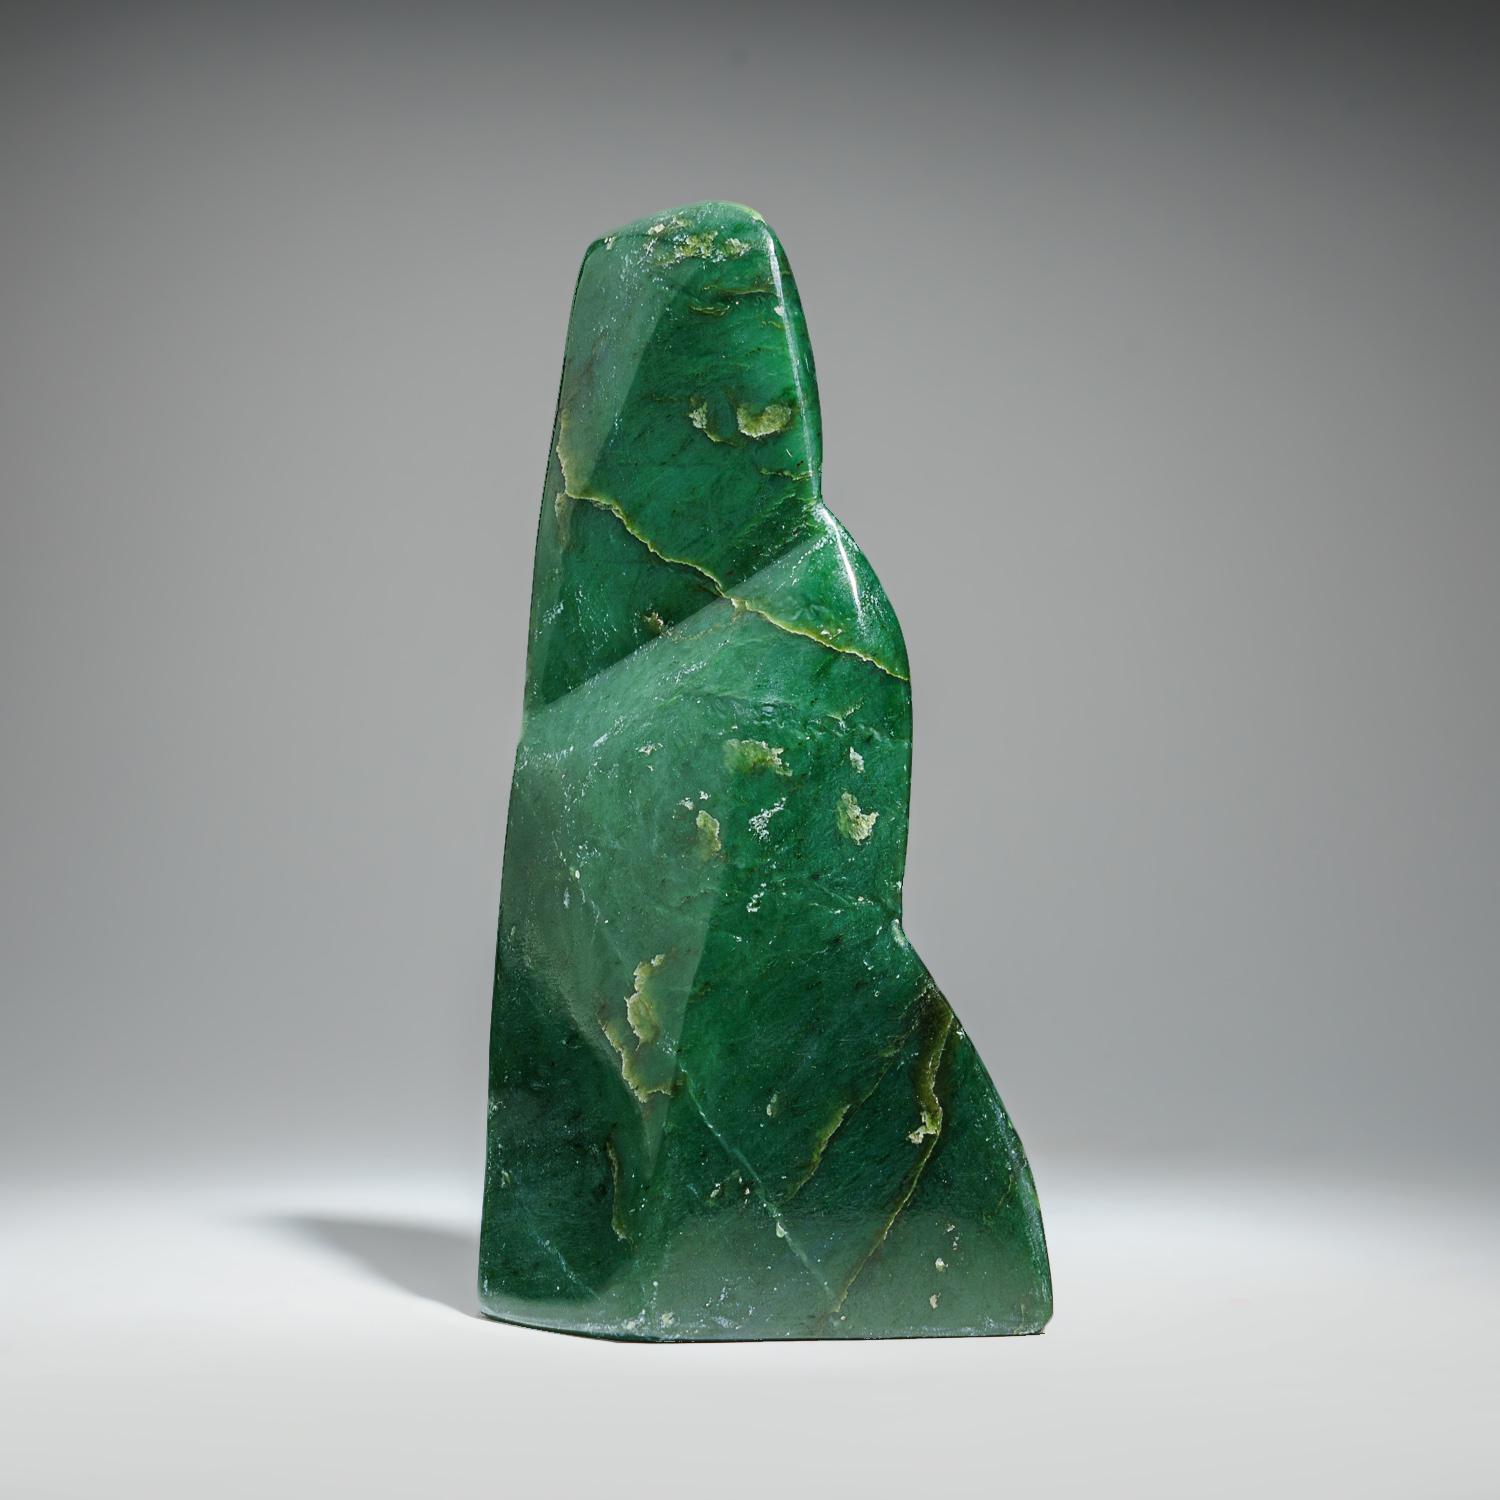 Contemporary Polished Nephrite Jade Freeform from Pakistan '2.5 lbs' For Sale